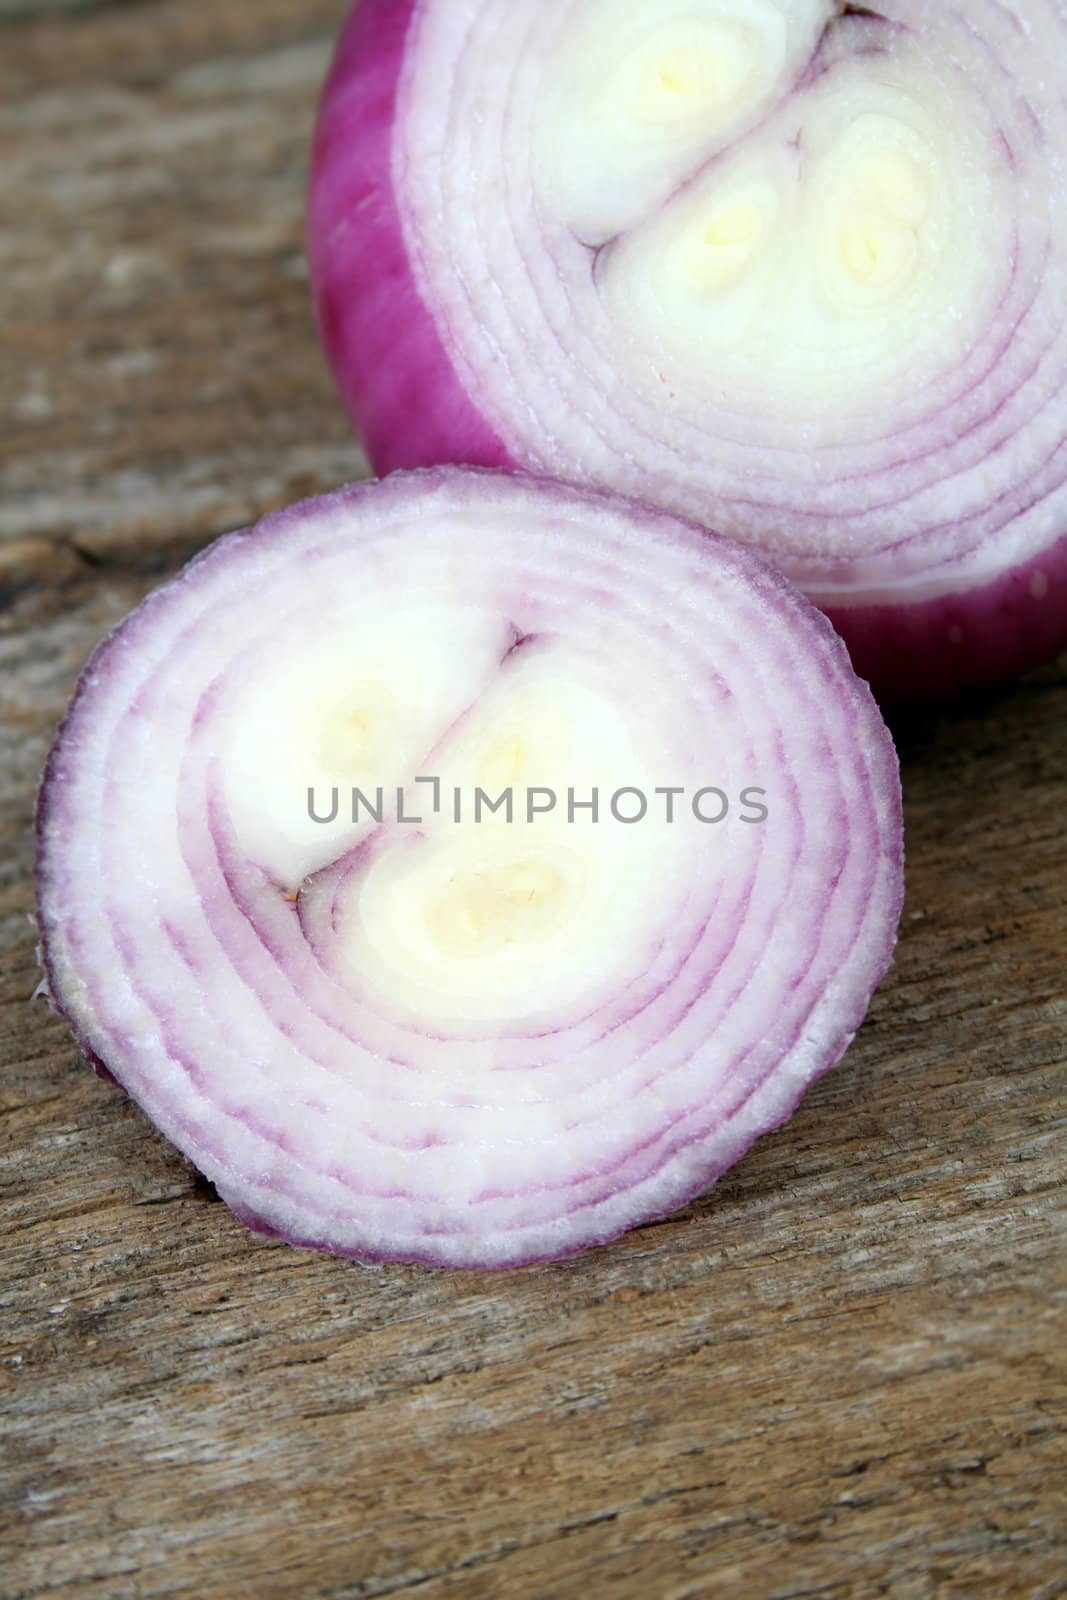 Red Onion by thephotoguy